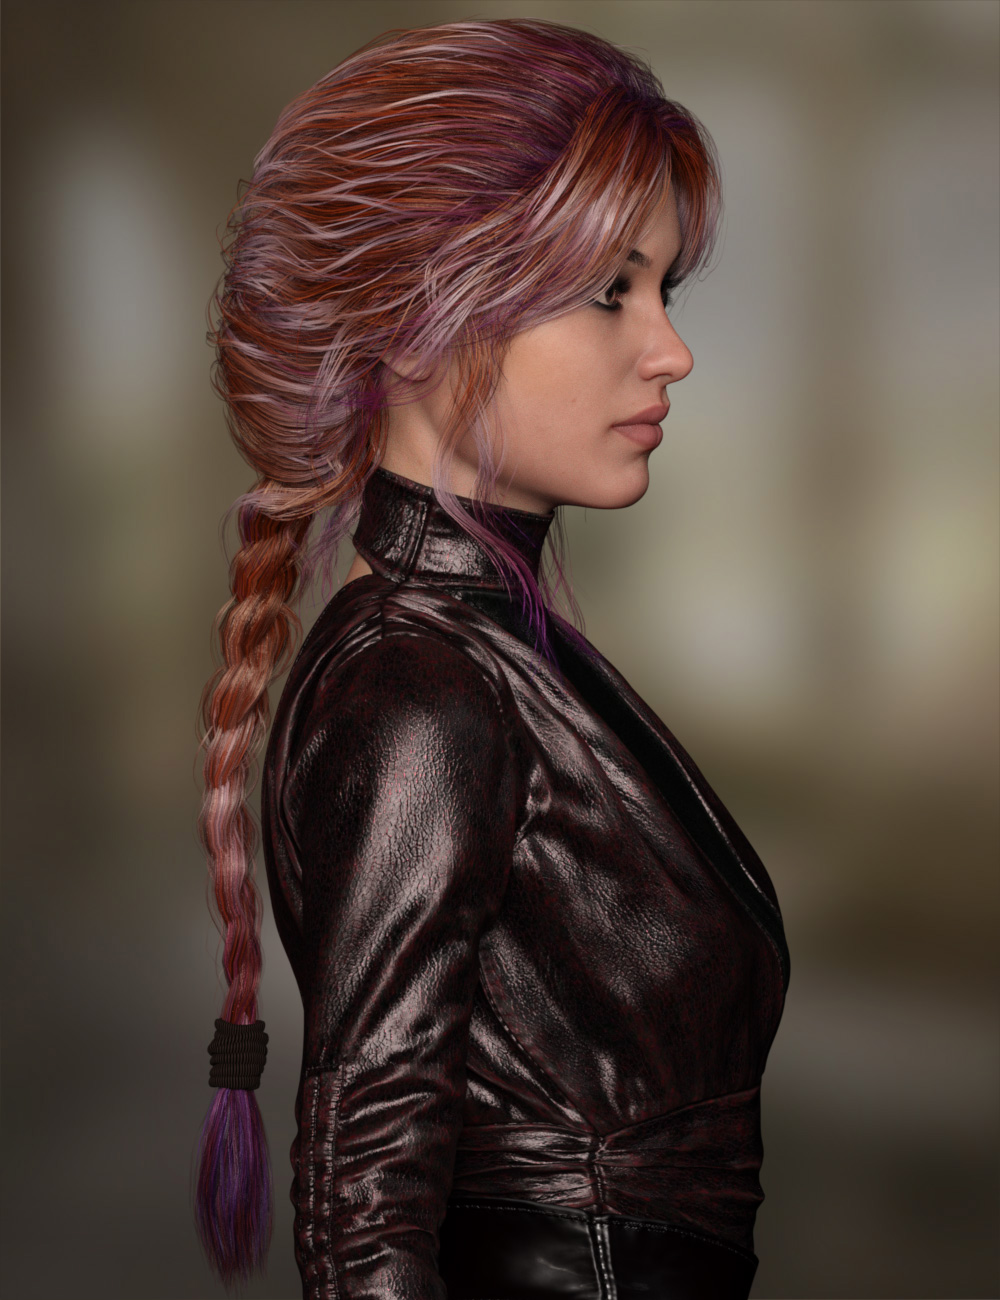 MRL Paintbox for Messy Hair for Genesis 8 and 8.1 Females